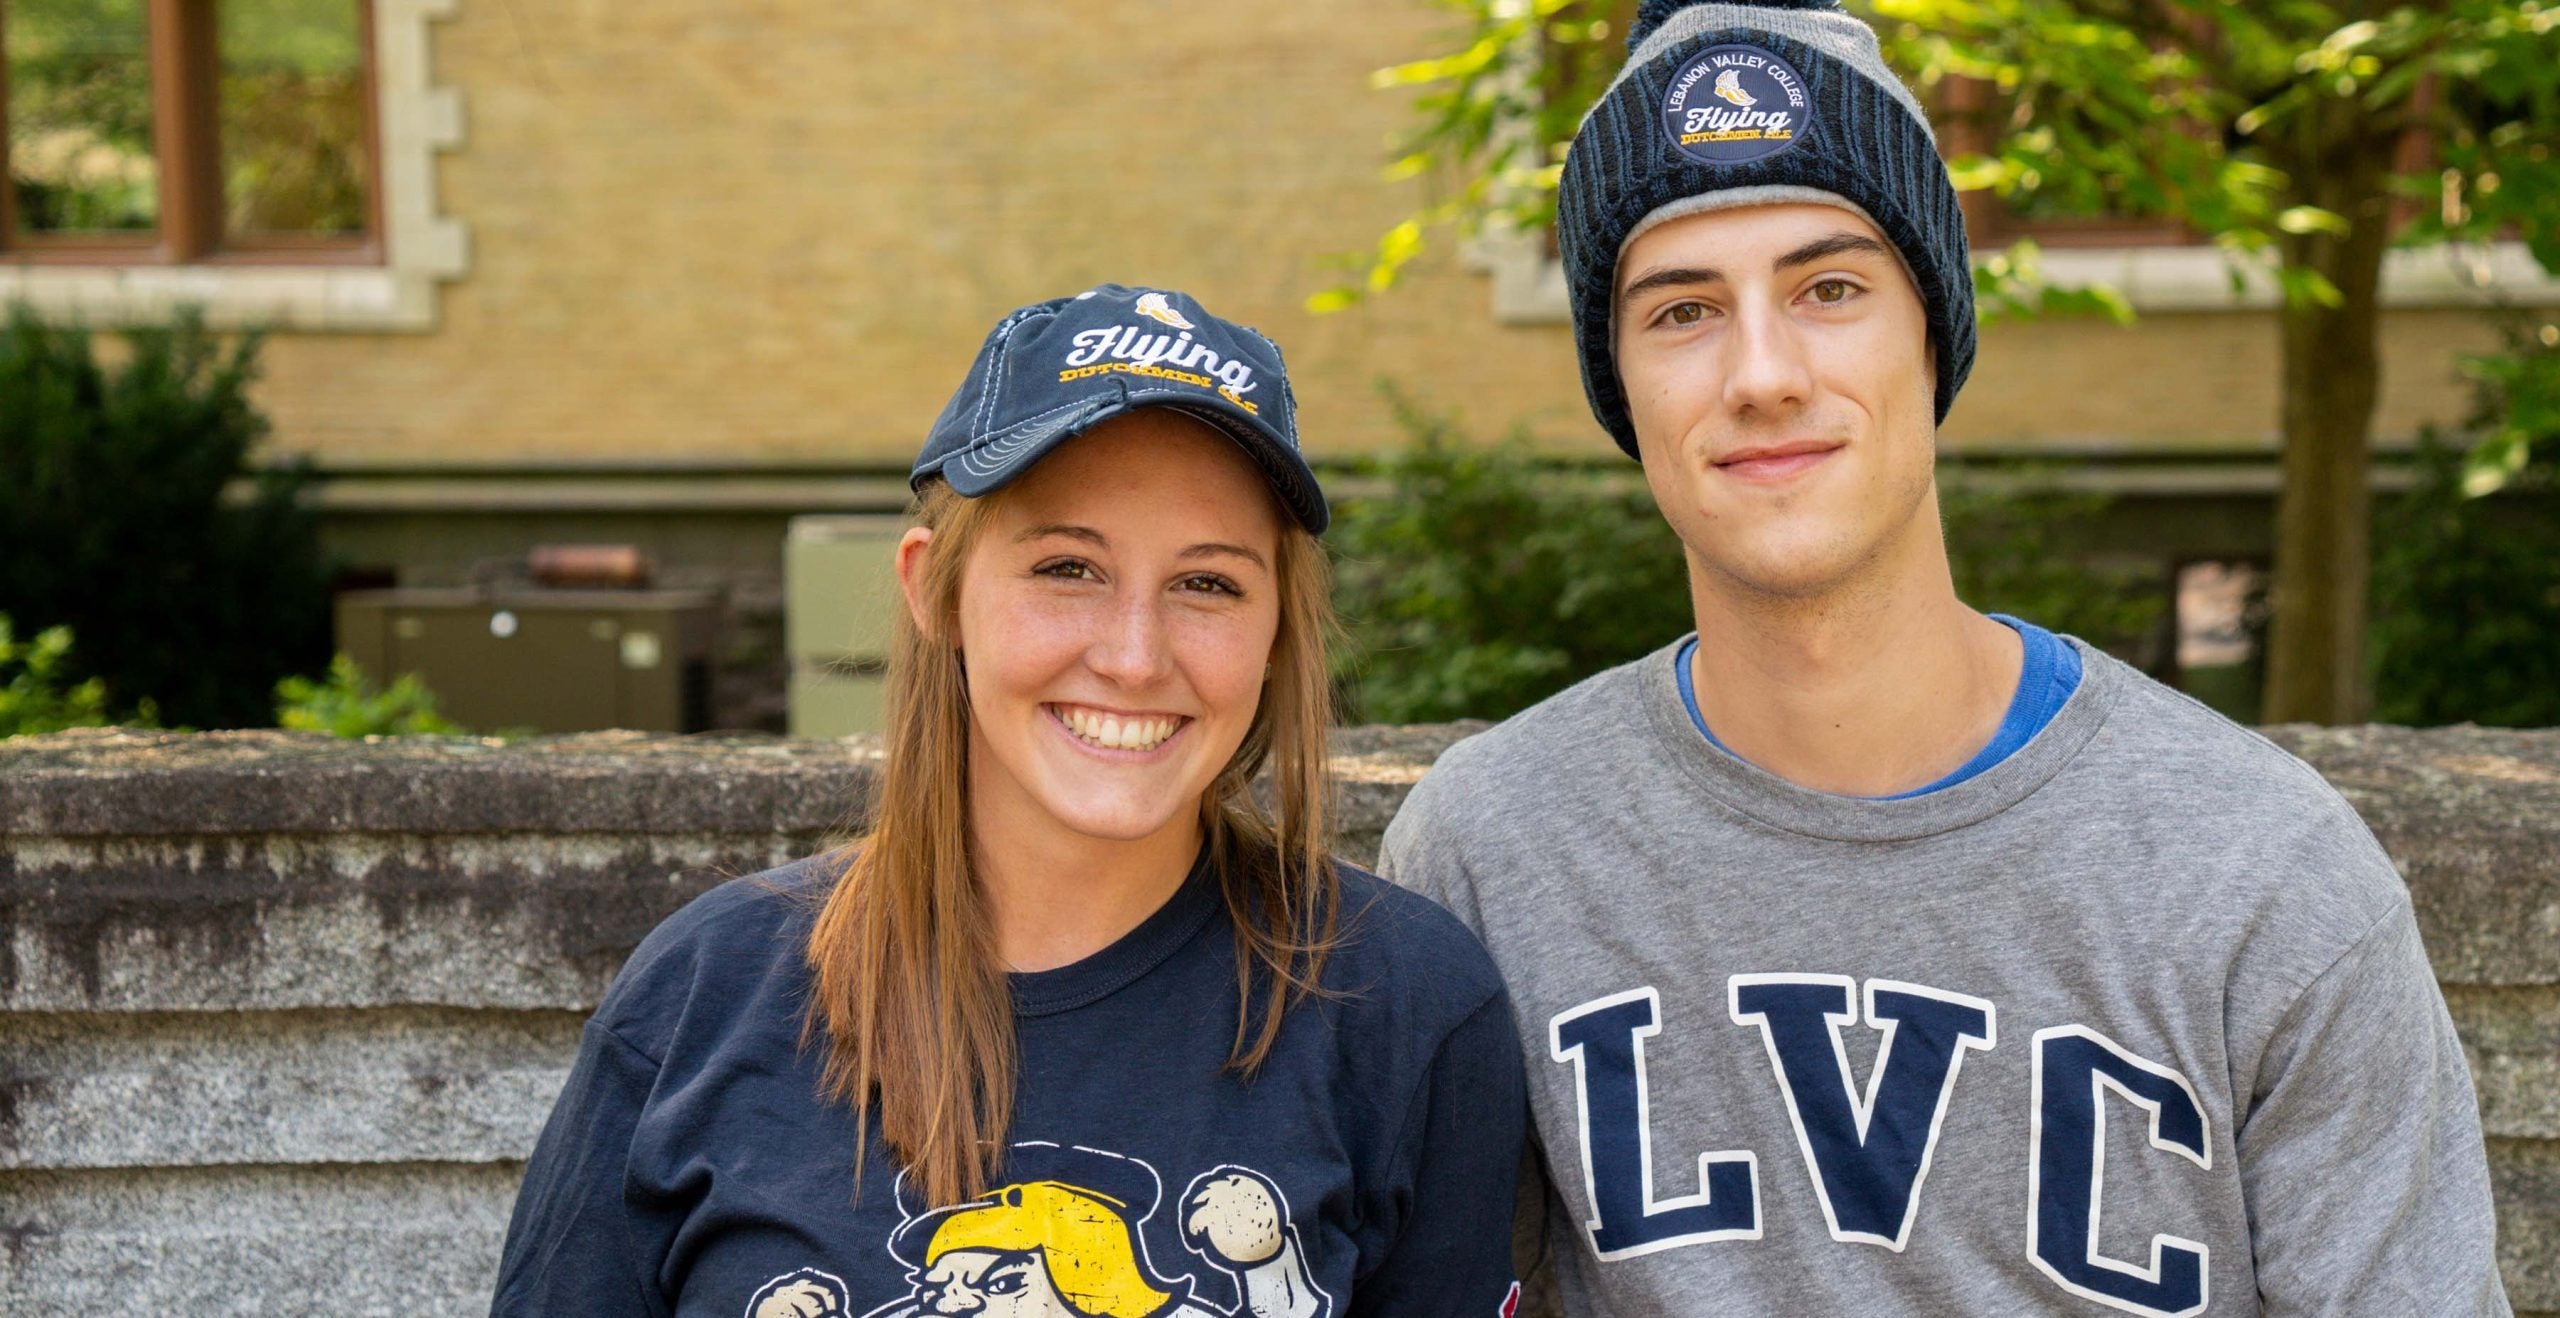 Two LVC alumni smiling in LVC hats and shirts.